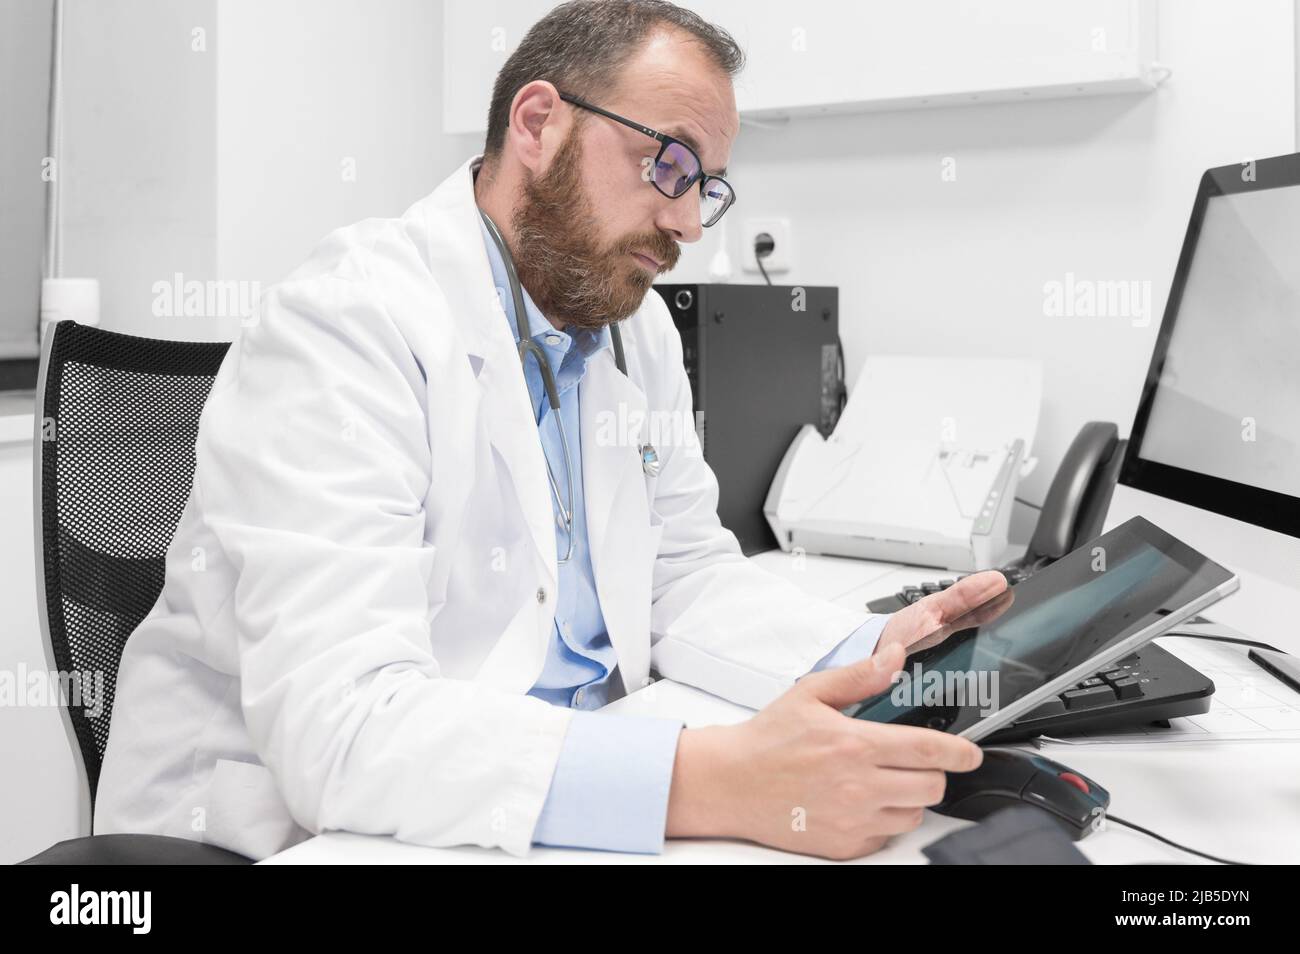 Doctor using his tablet computer at work. High quality photo. Stock Photo